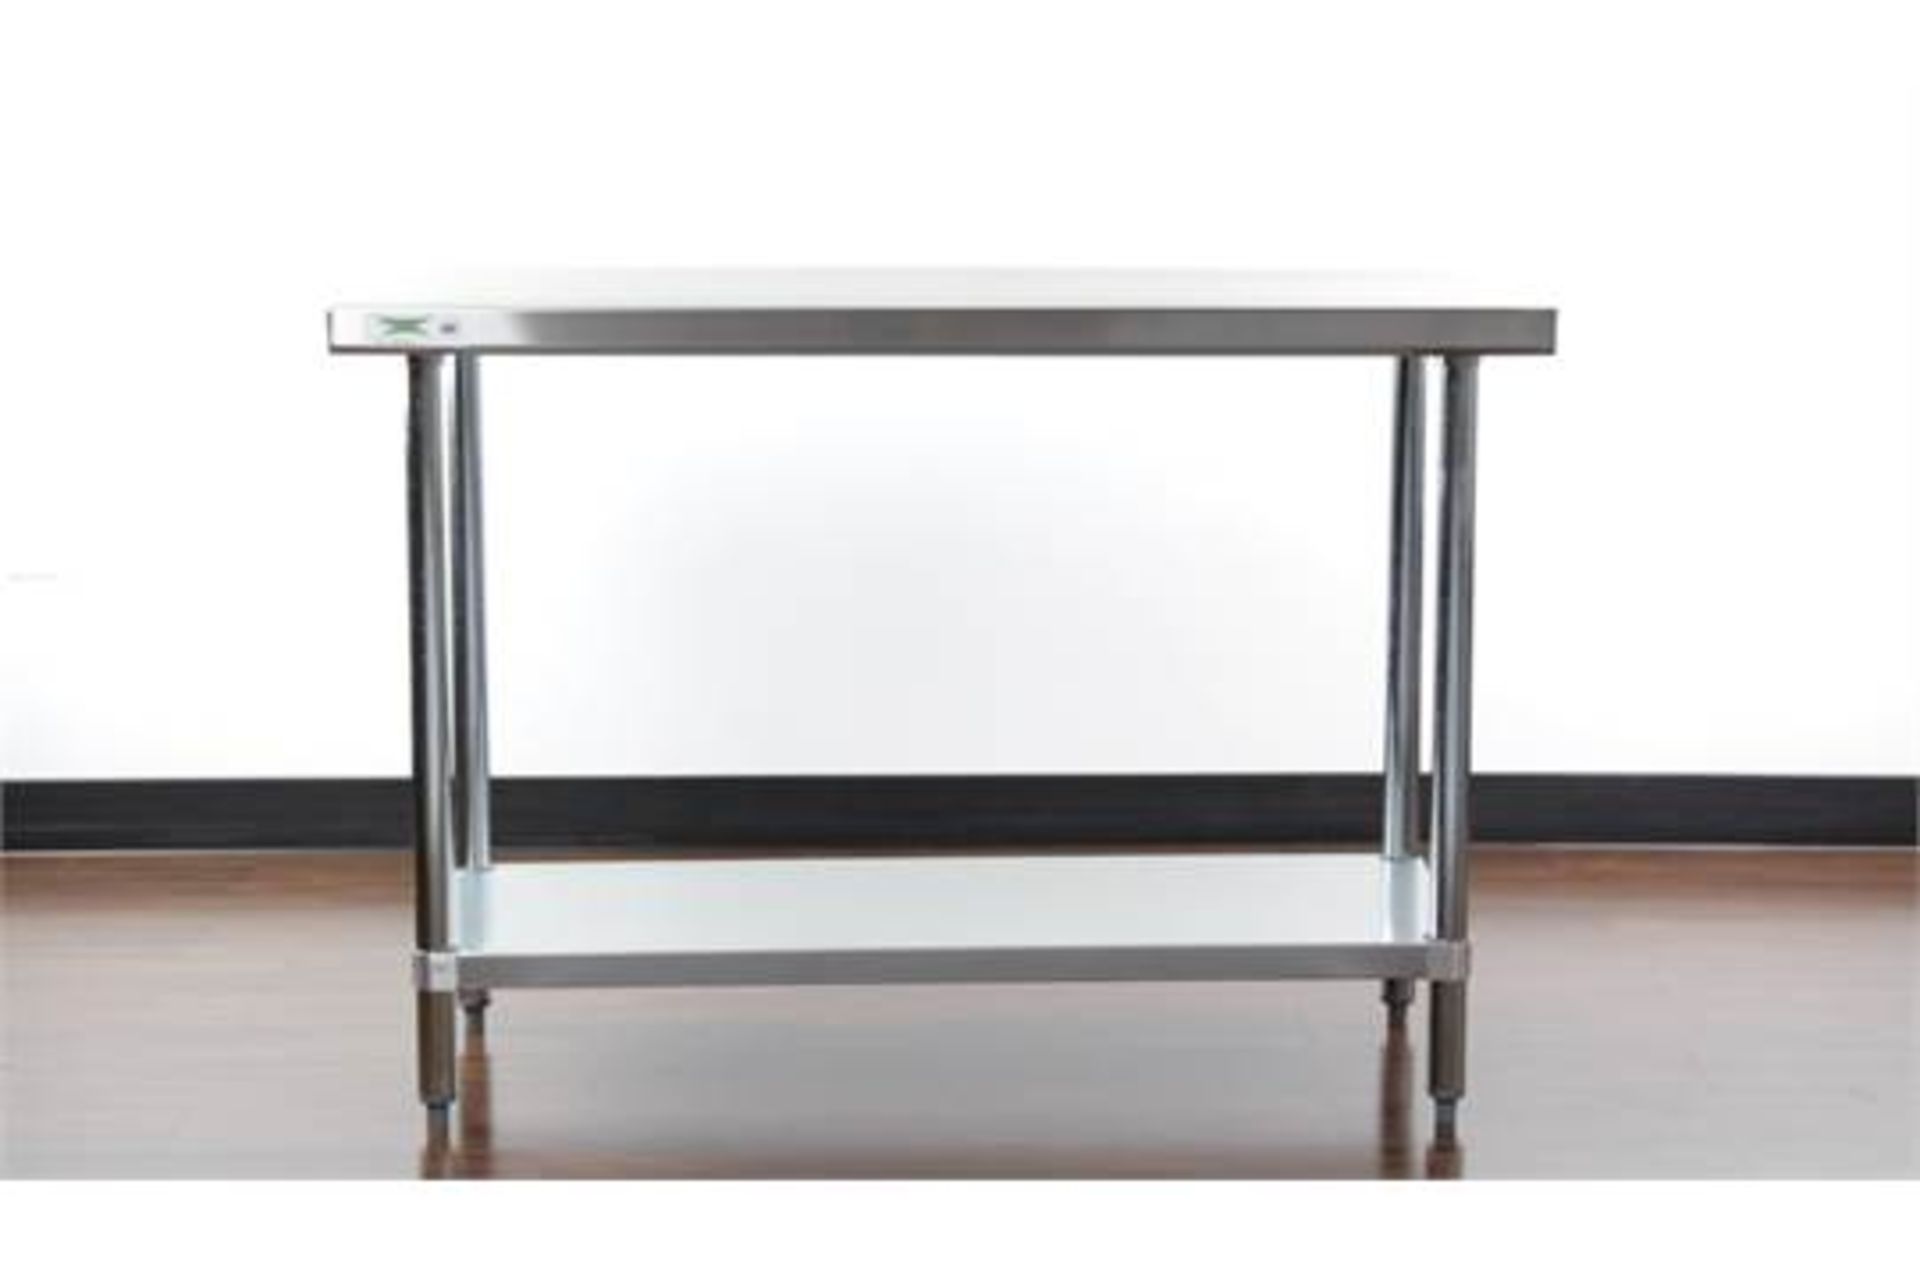 Brand New stainless steel heavy duty preparation table 1100mm x 600mm x 8000mm 50mm thick top